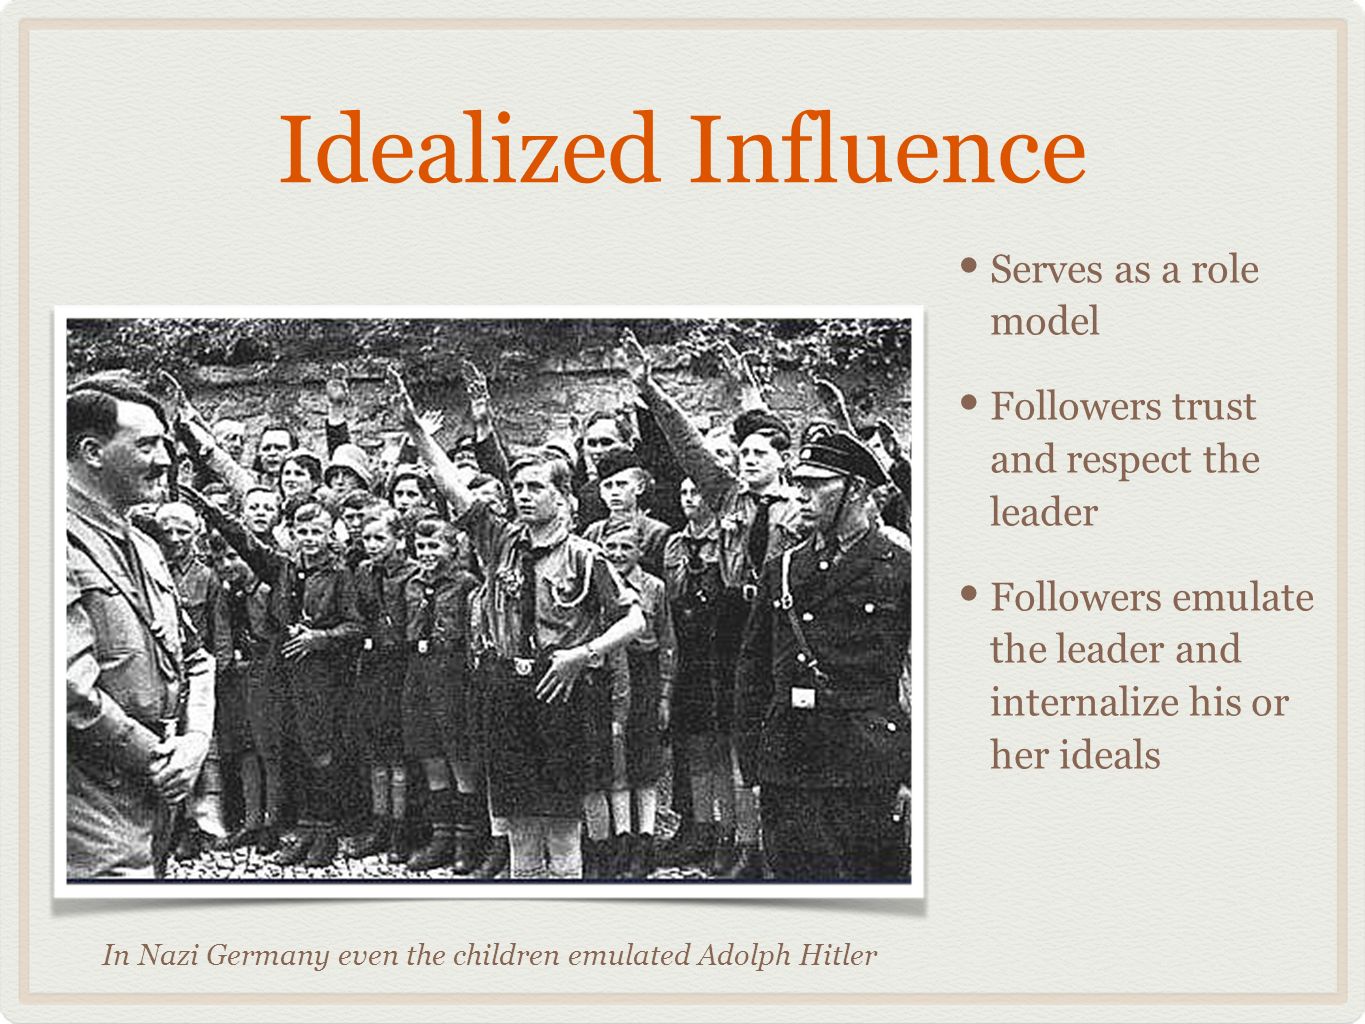 Idealized Influence Serves as a role model Followers trust and respect the leader Followers emulate the leader and internalize his or her ideals In Nazi Germany even the children emulated Adolph Hitler